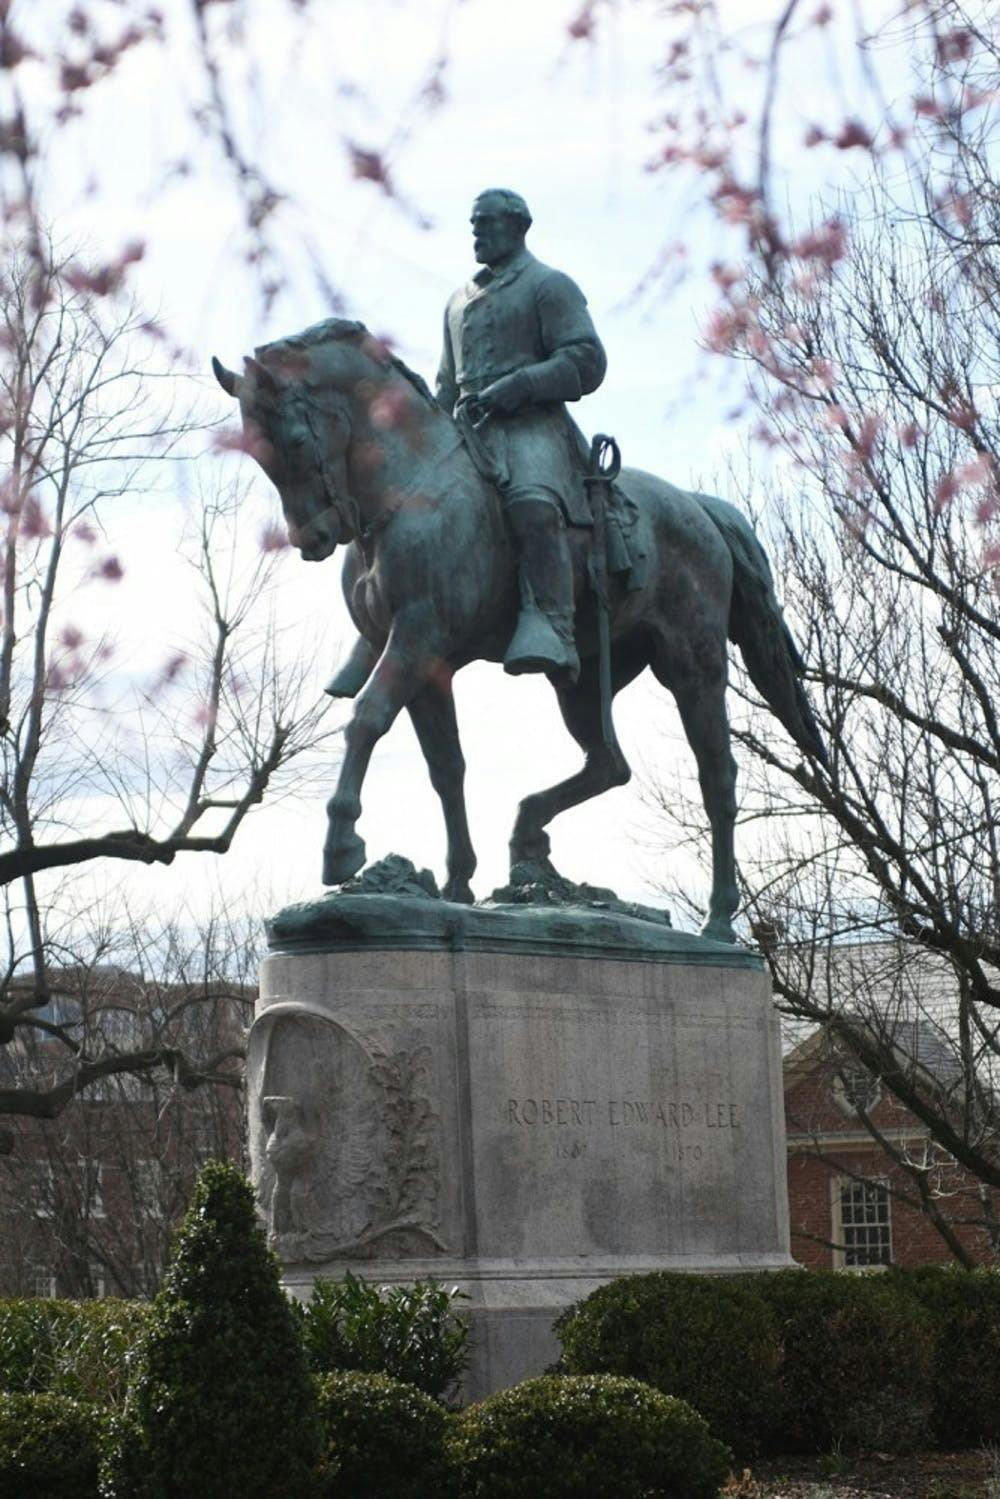 This is the third time since September that vandals have defaced the Civil War monuments.